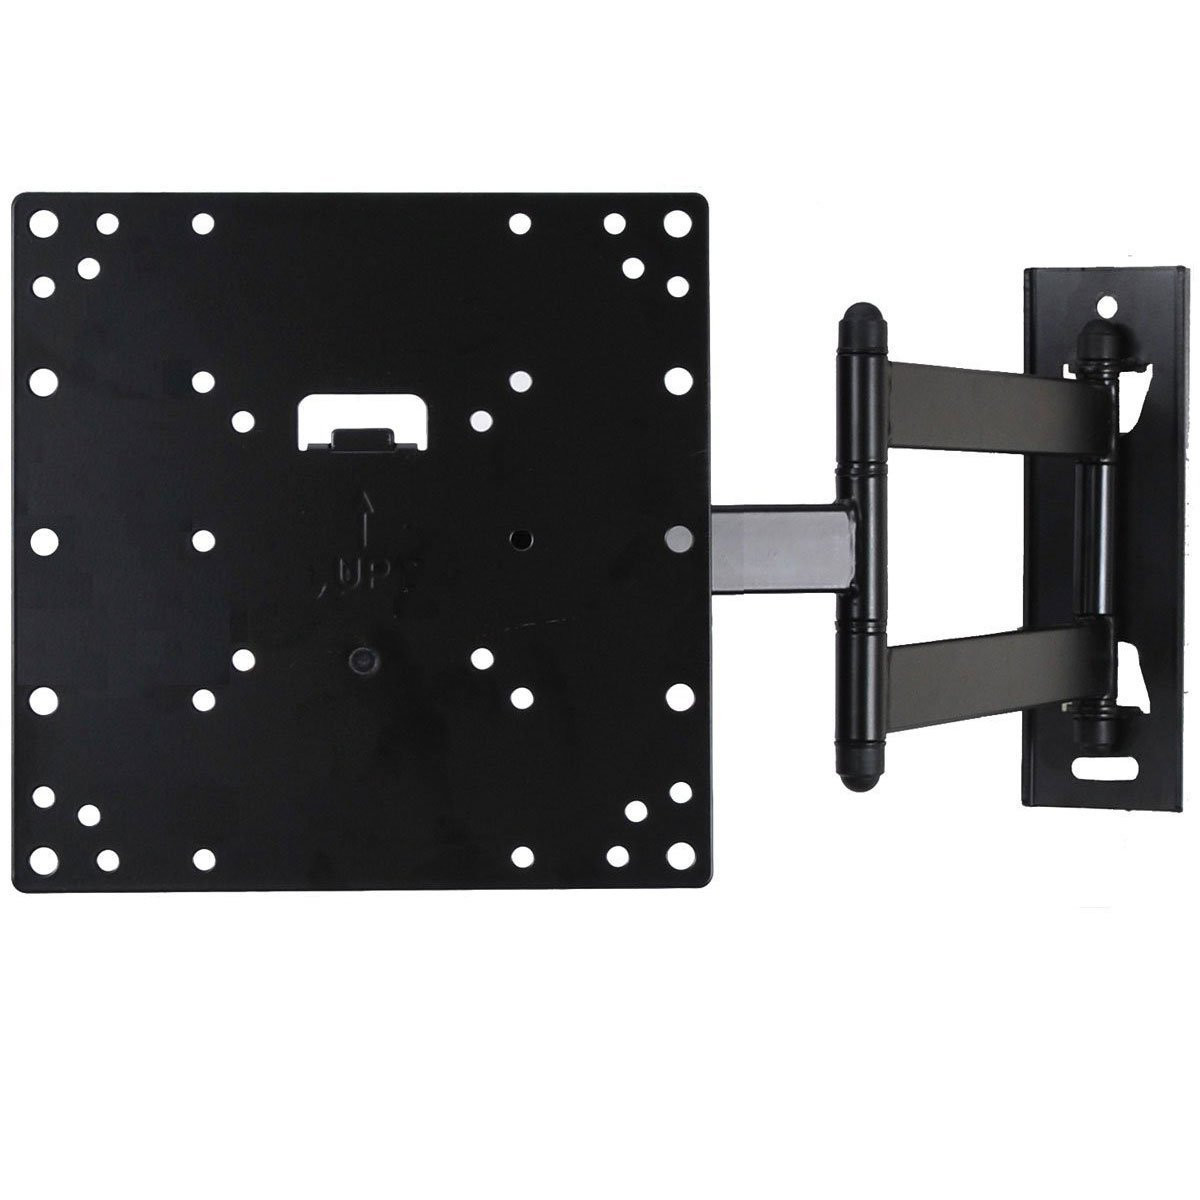 VideoSecu Articulating TV Wall Mount for 24 29 32 39 40" VIZIO D32x-D1 E32h-C1 D39hn-E0 D40u-D1 LED LCD Tilt Swivel BN1 - image 1 of 4